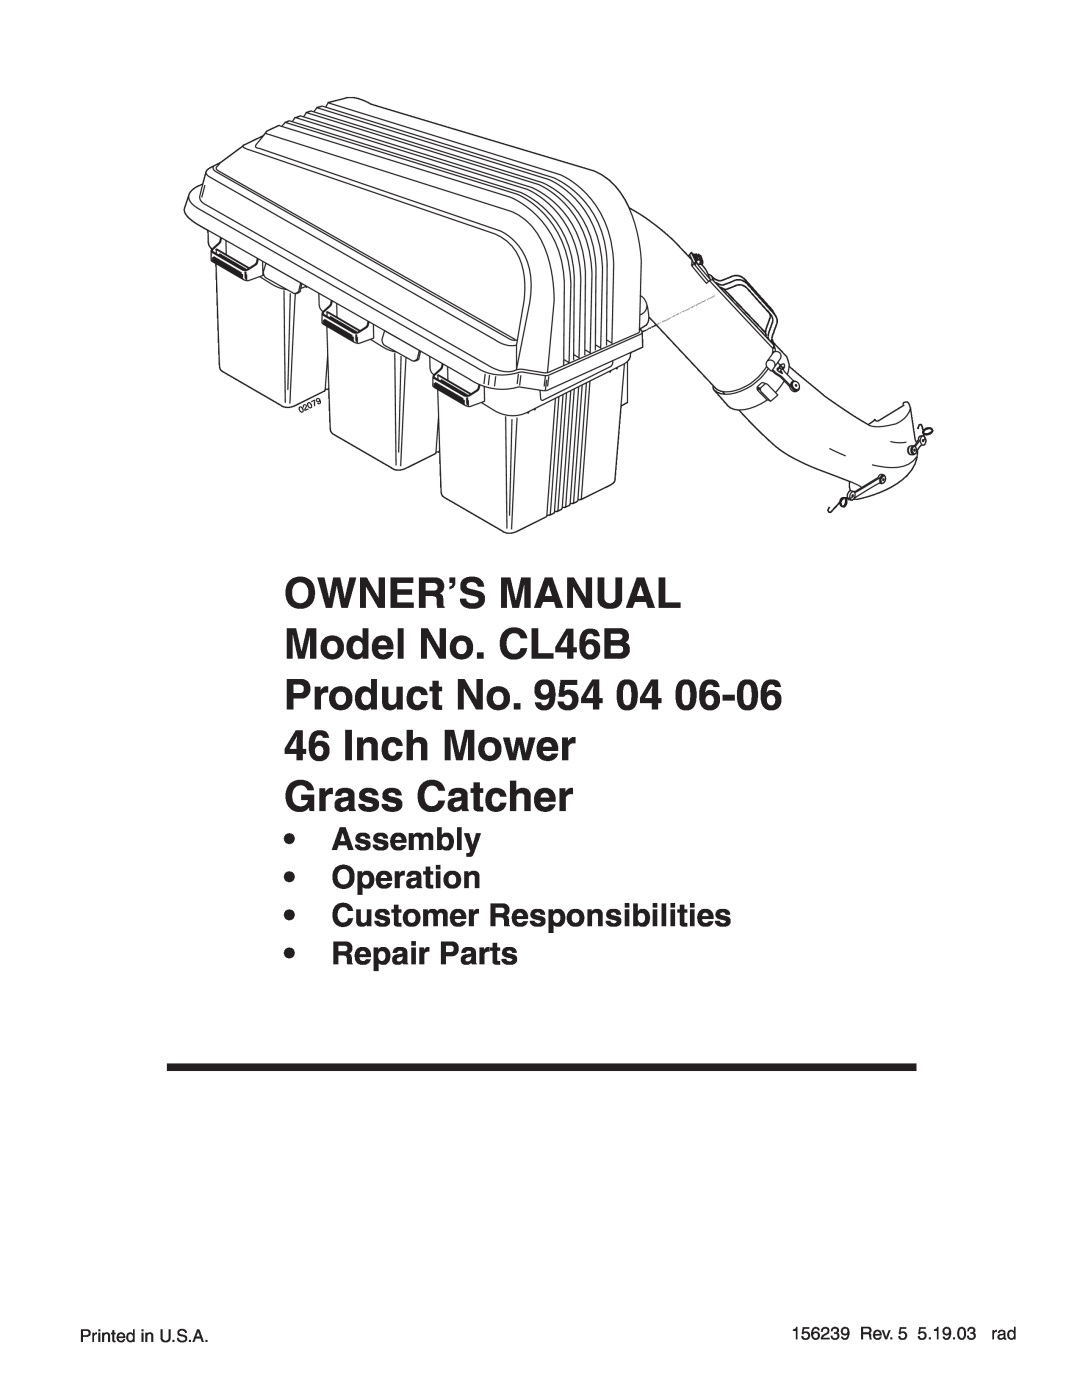 Poulan 954 04 06-06, CL46B owner manual Grass Catcher, Assembly Operation Customer Responsibilities Repair Parts, 02079 